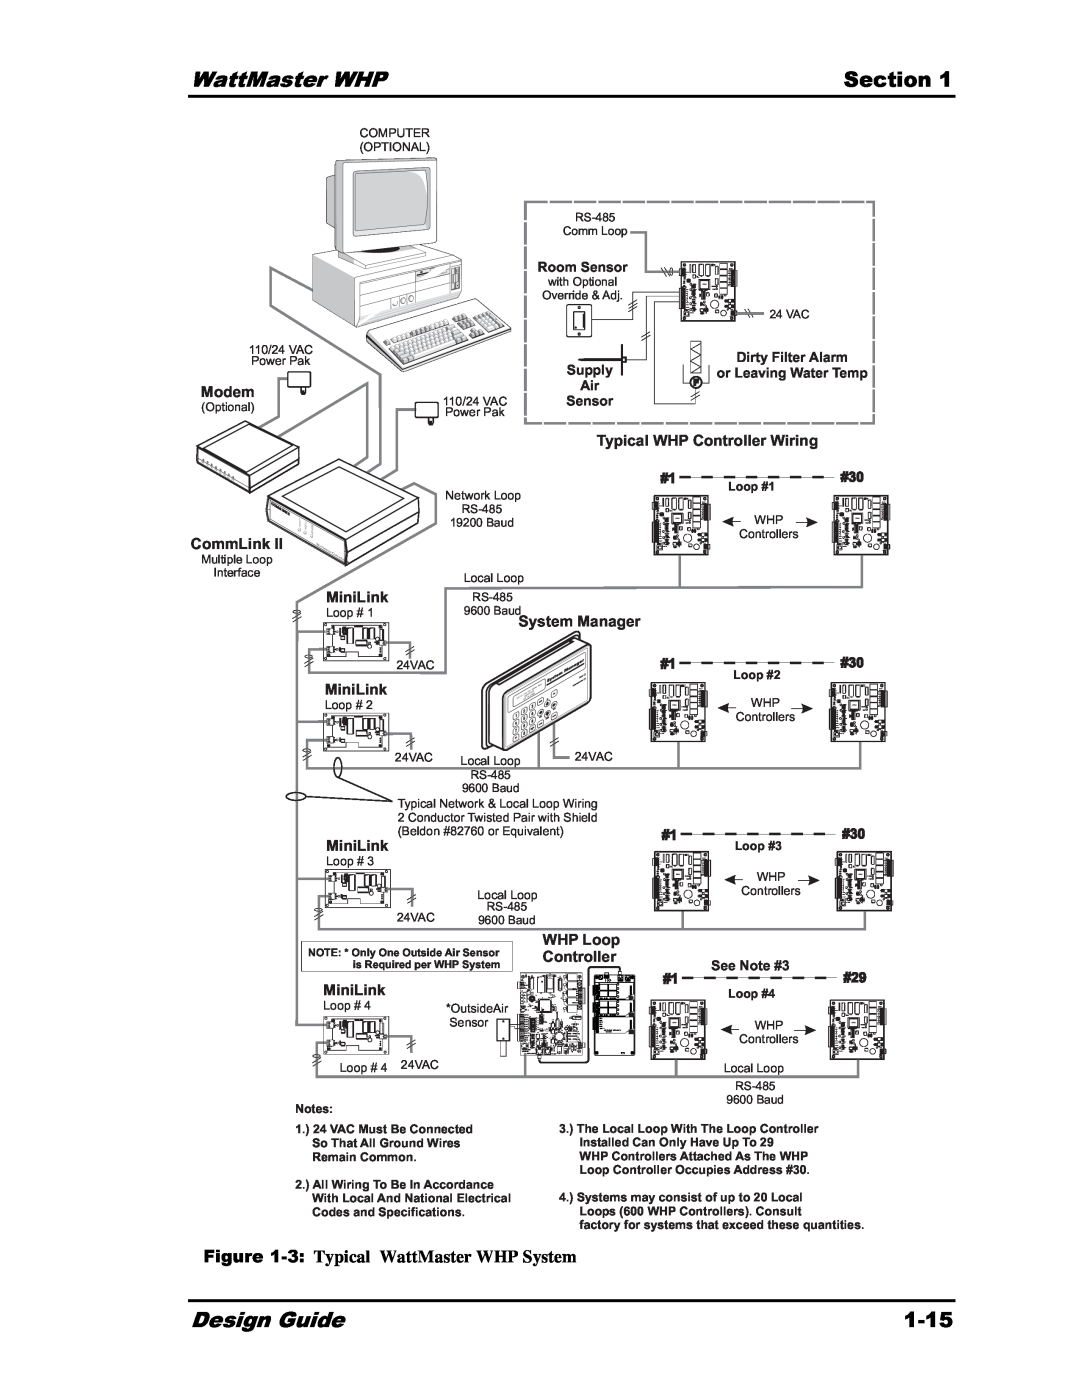 Heat Controller Water Source Heat Pump 3, Section, 1-15, Design Guide, Typical WattMaster WHP System, Modem, MiniLink 